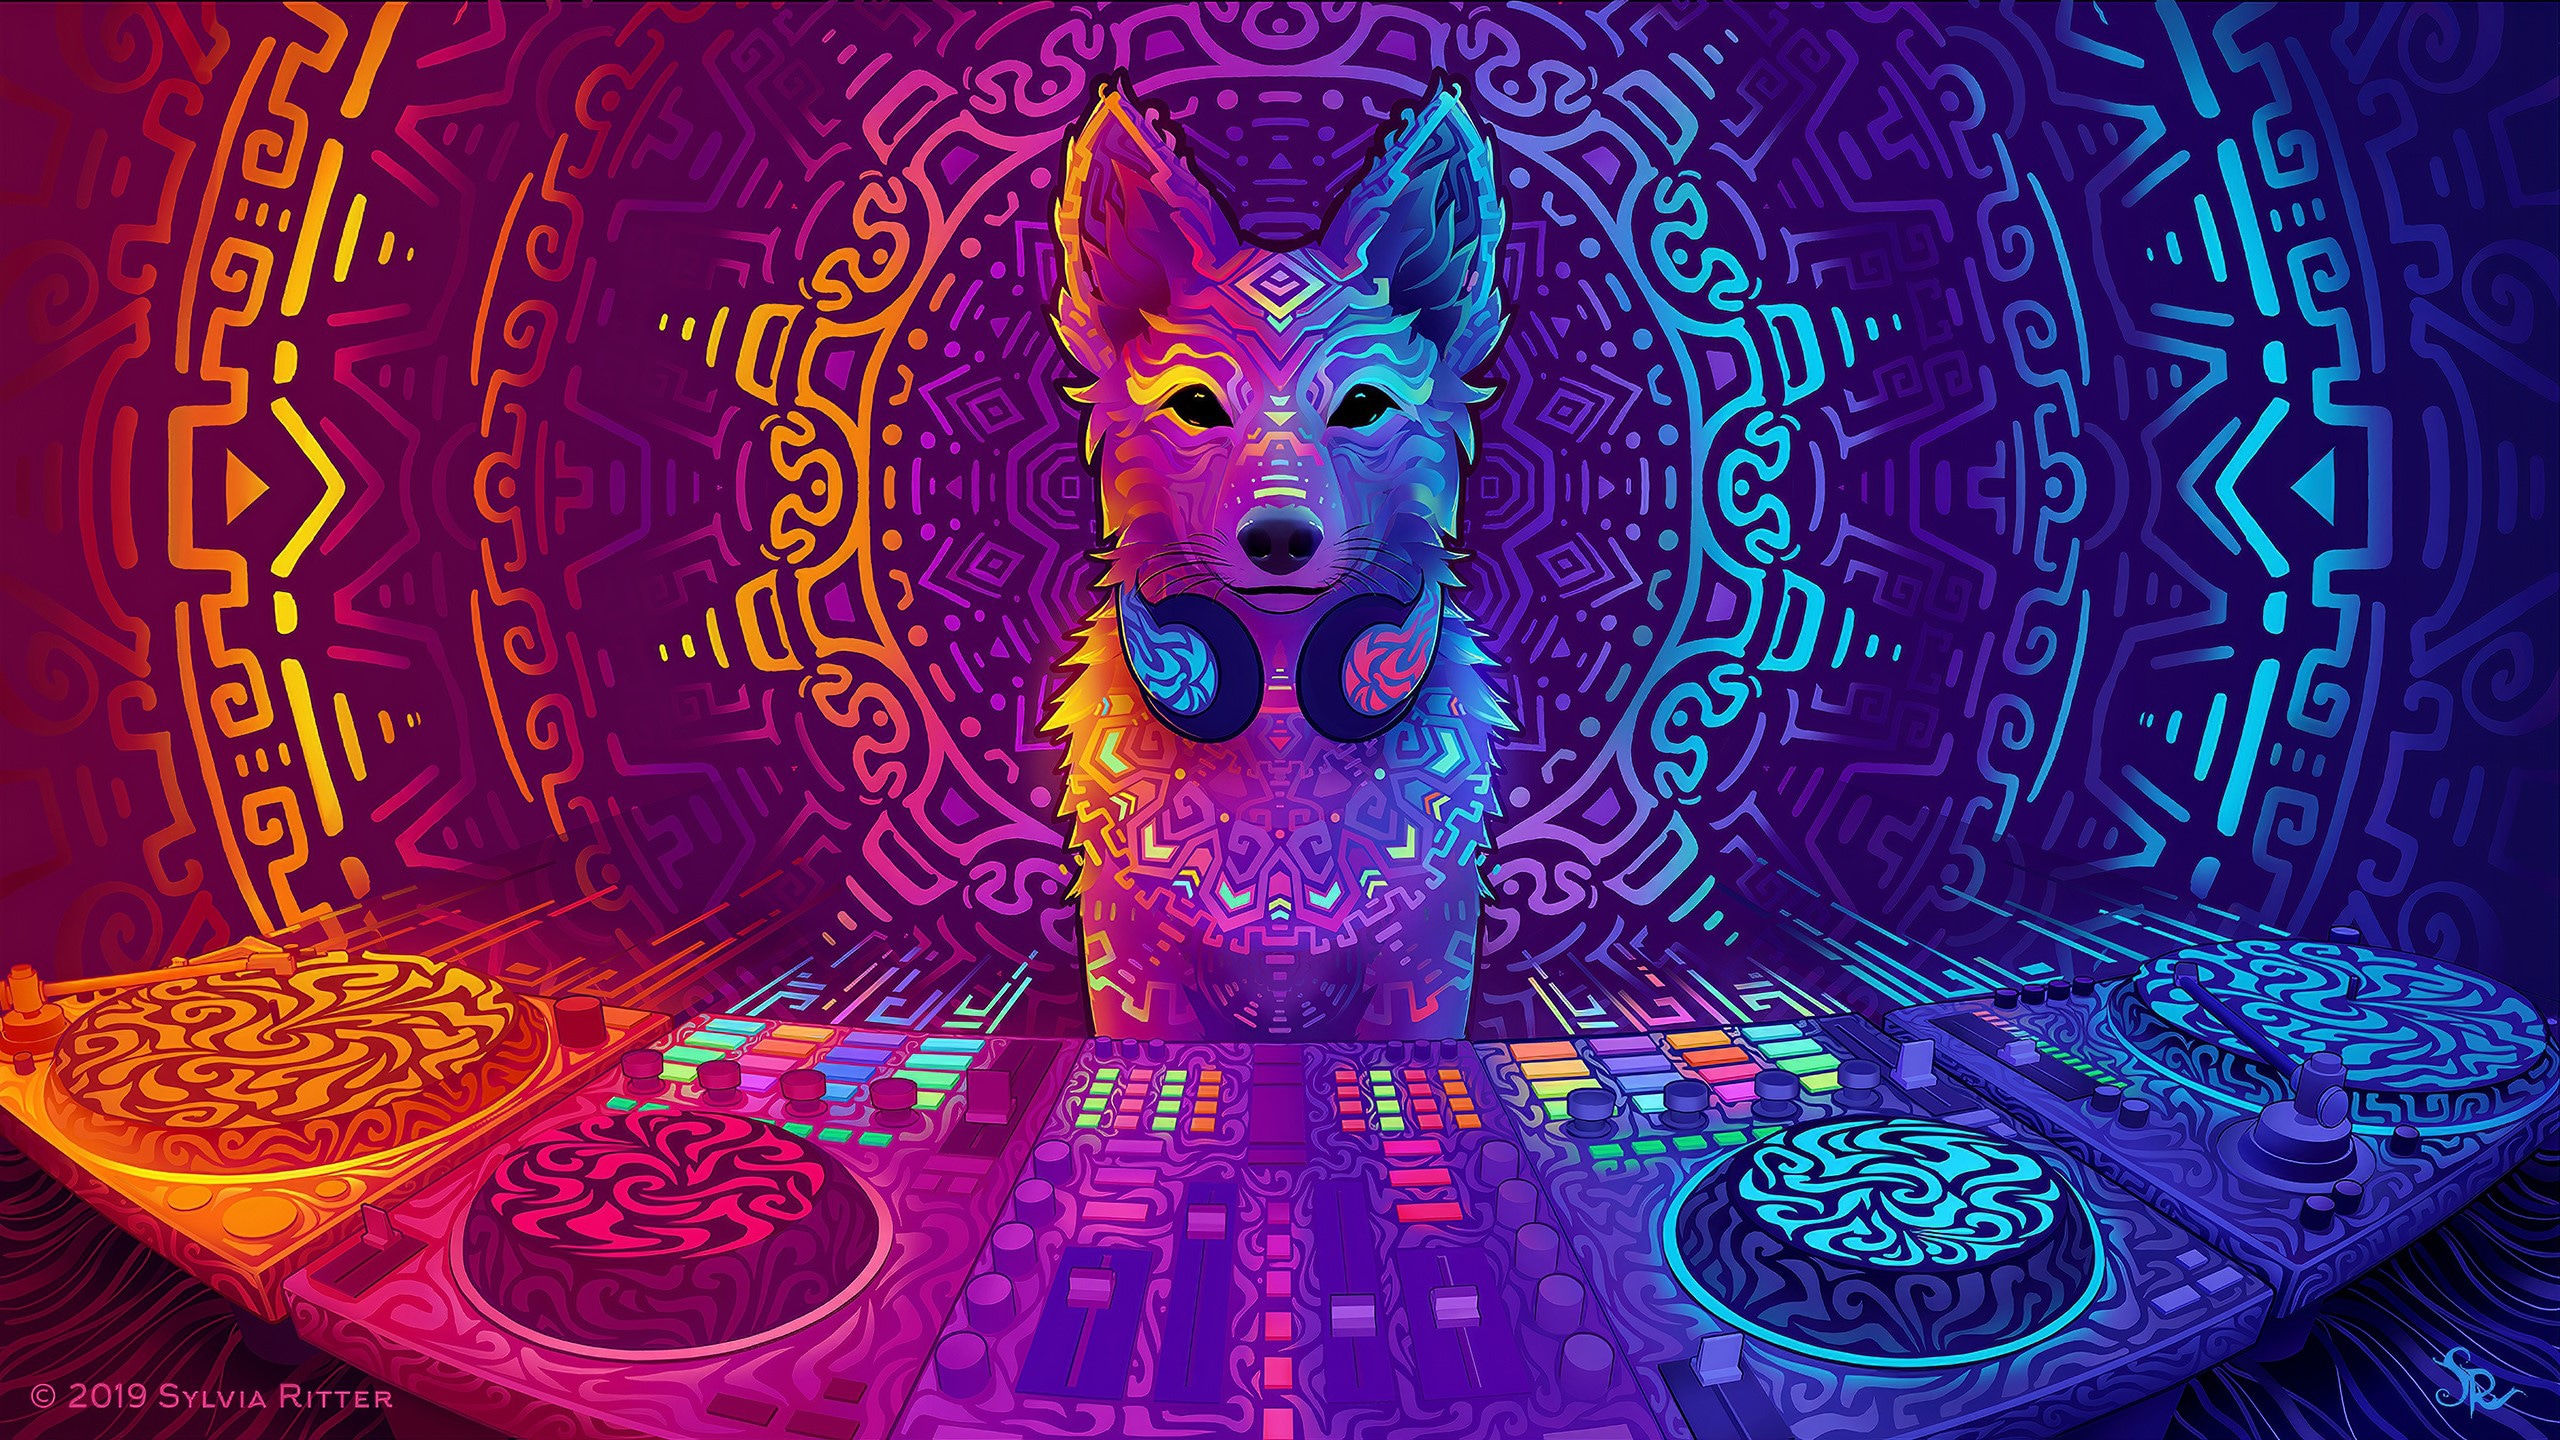 Wallpaper / psychedelic, abstract, colorful, headphones, music player, sound mixers, technology, music, digital art, Ubuntu, disc jockey, turntables, Linux, dingo, DJ, Sylvia Ritter, blue, cyan free download